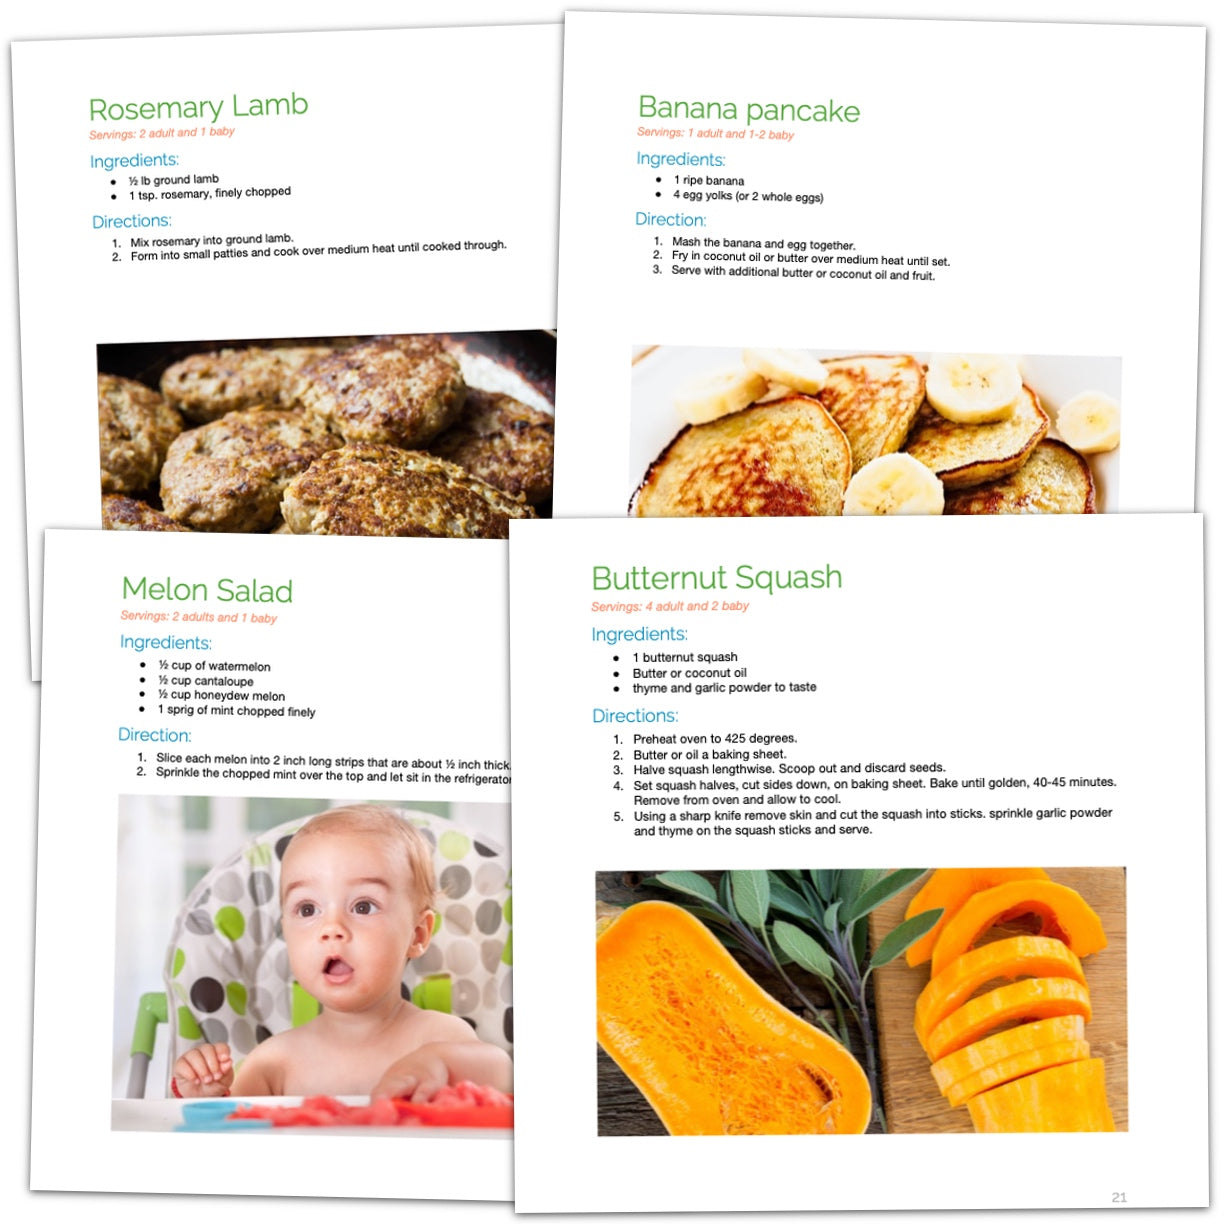 Baby-Led Weaning Cookbook : For Babies 6 To 12 Months Learn